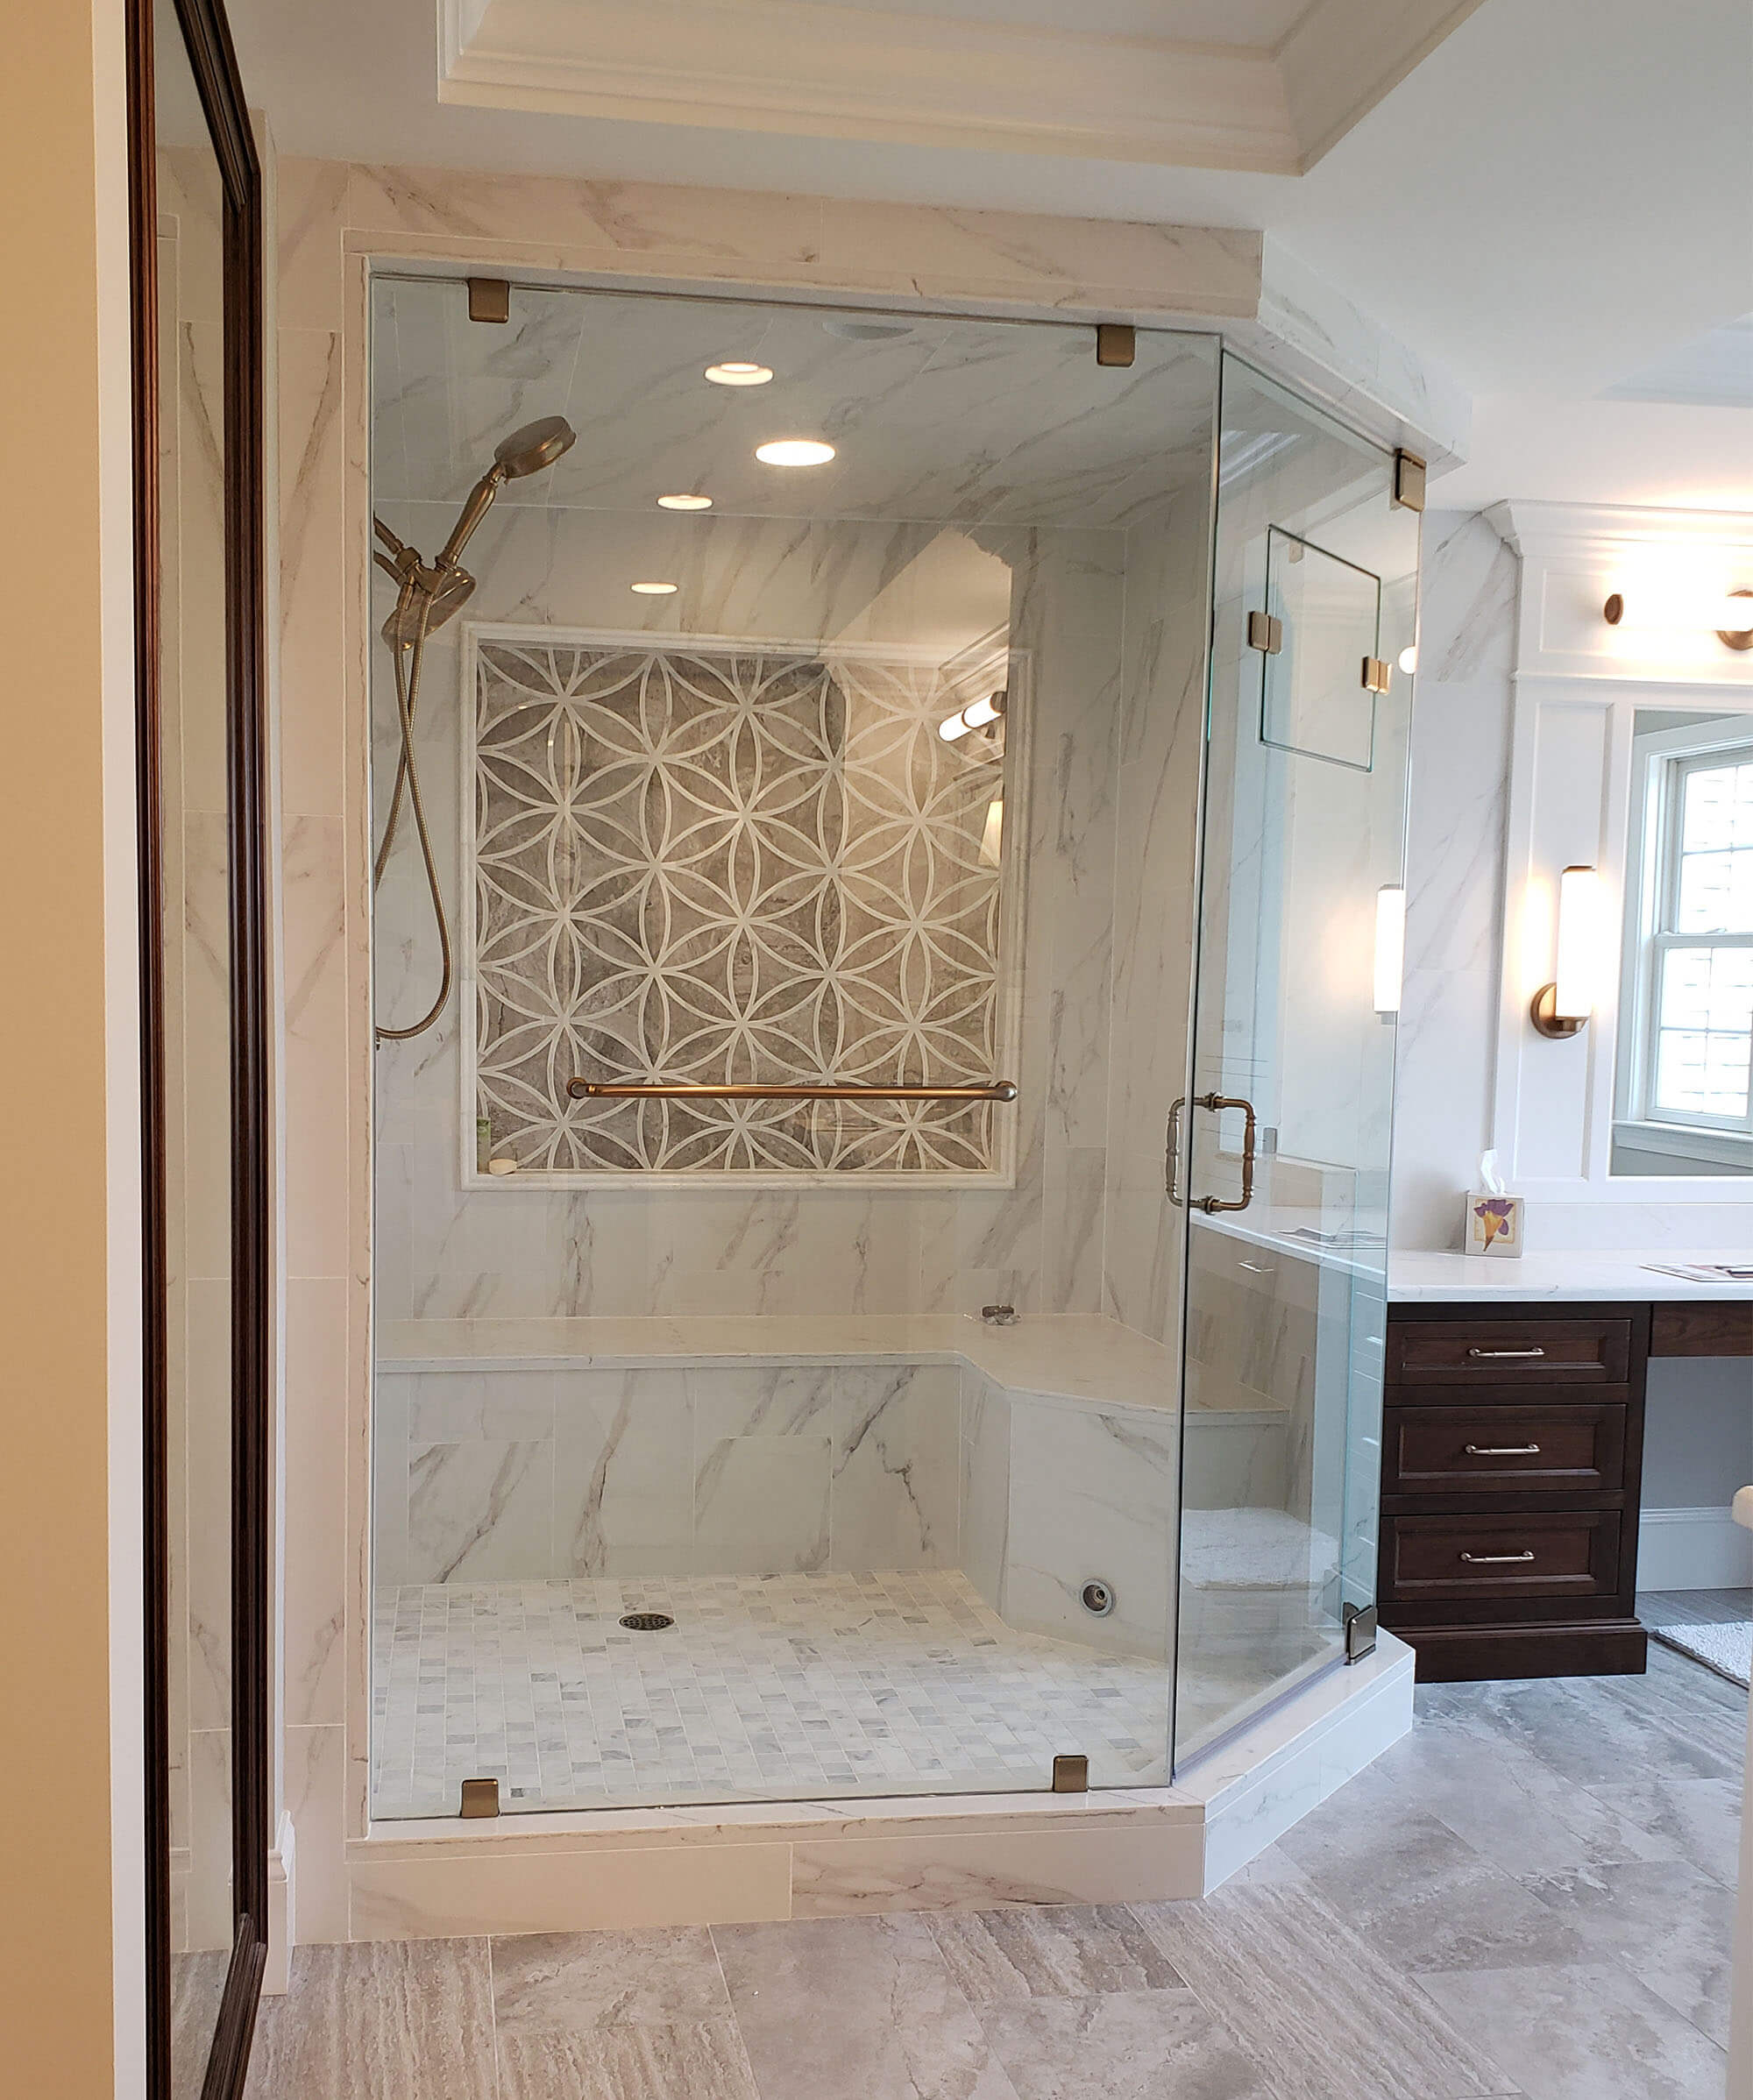 Shower with frameless glass walls and doors